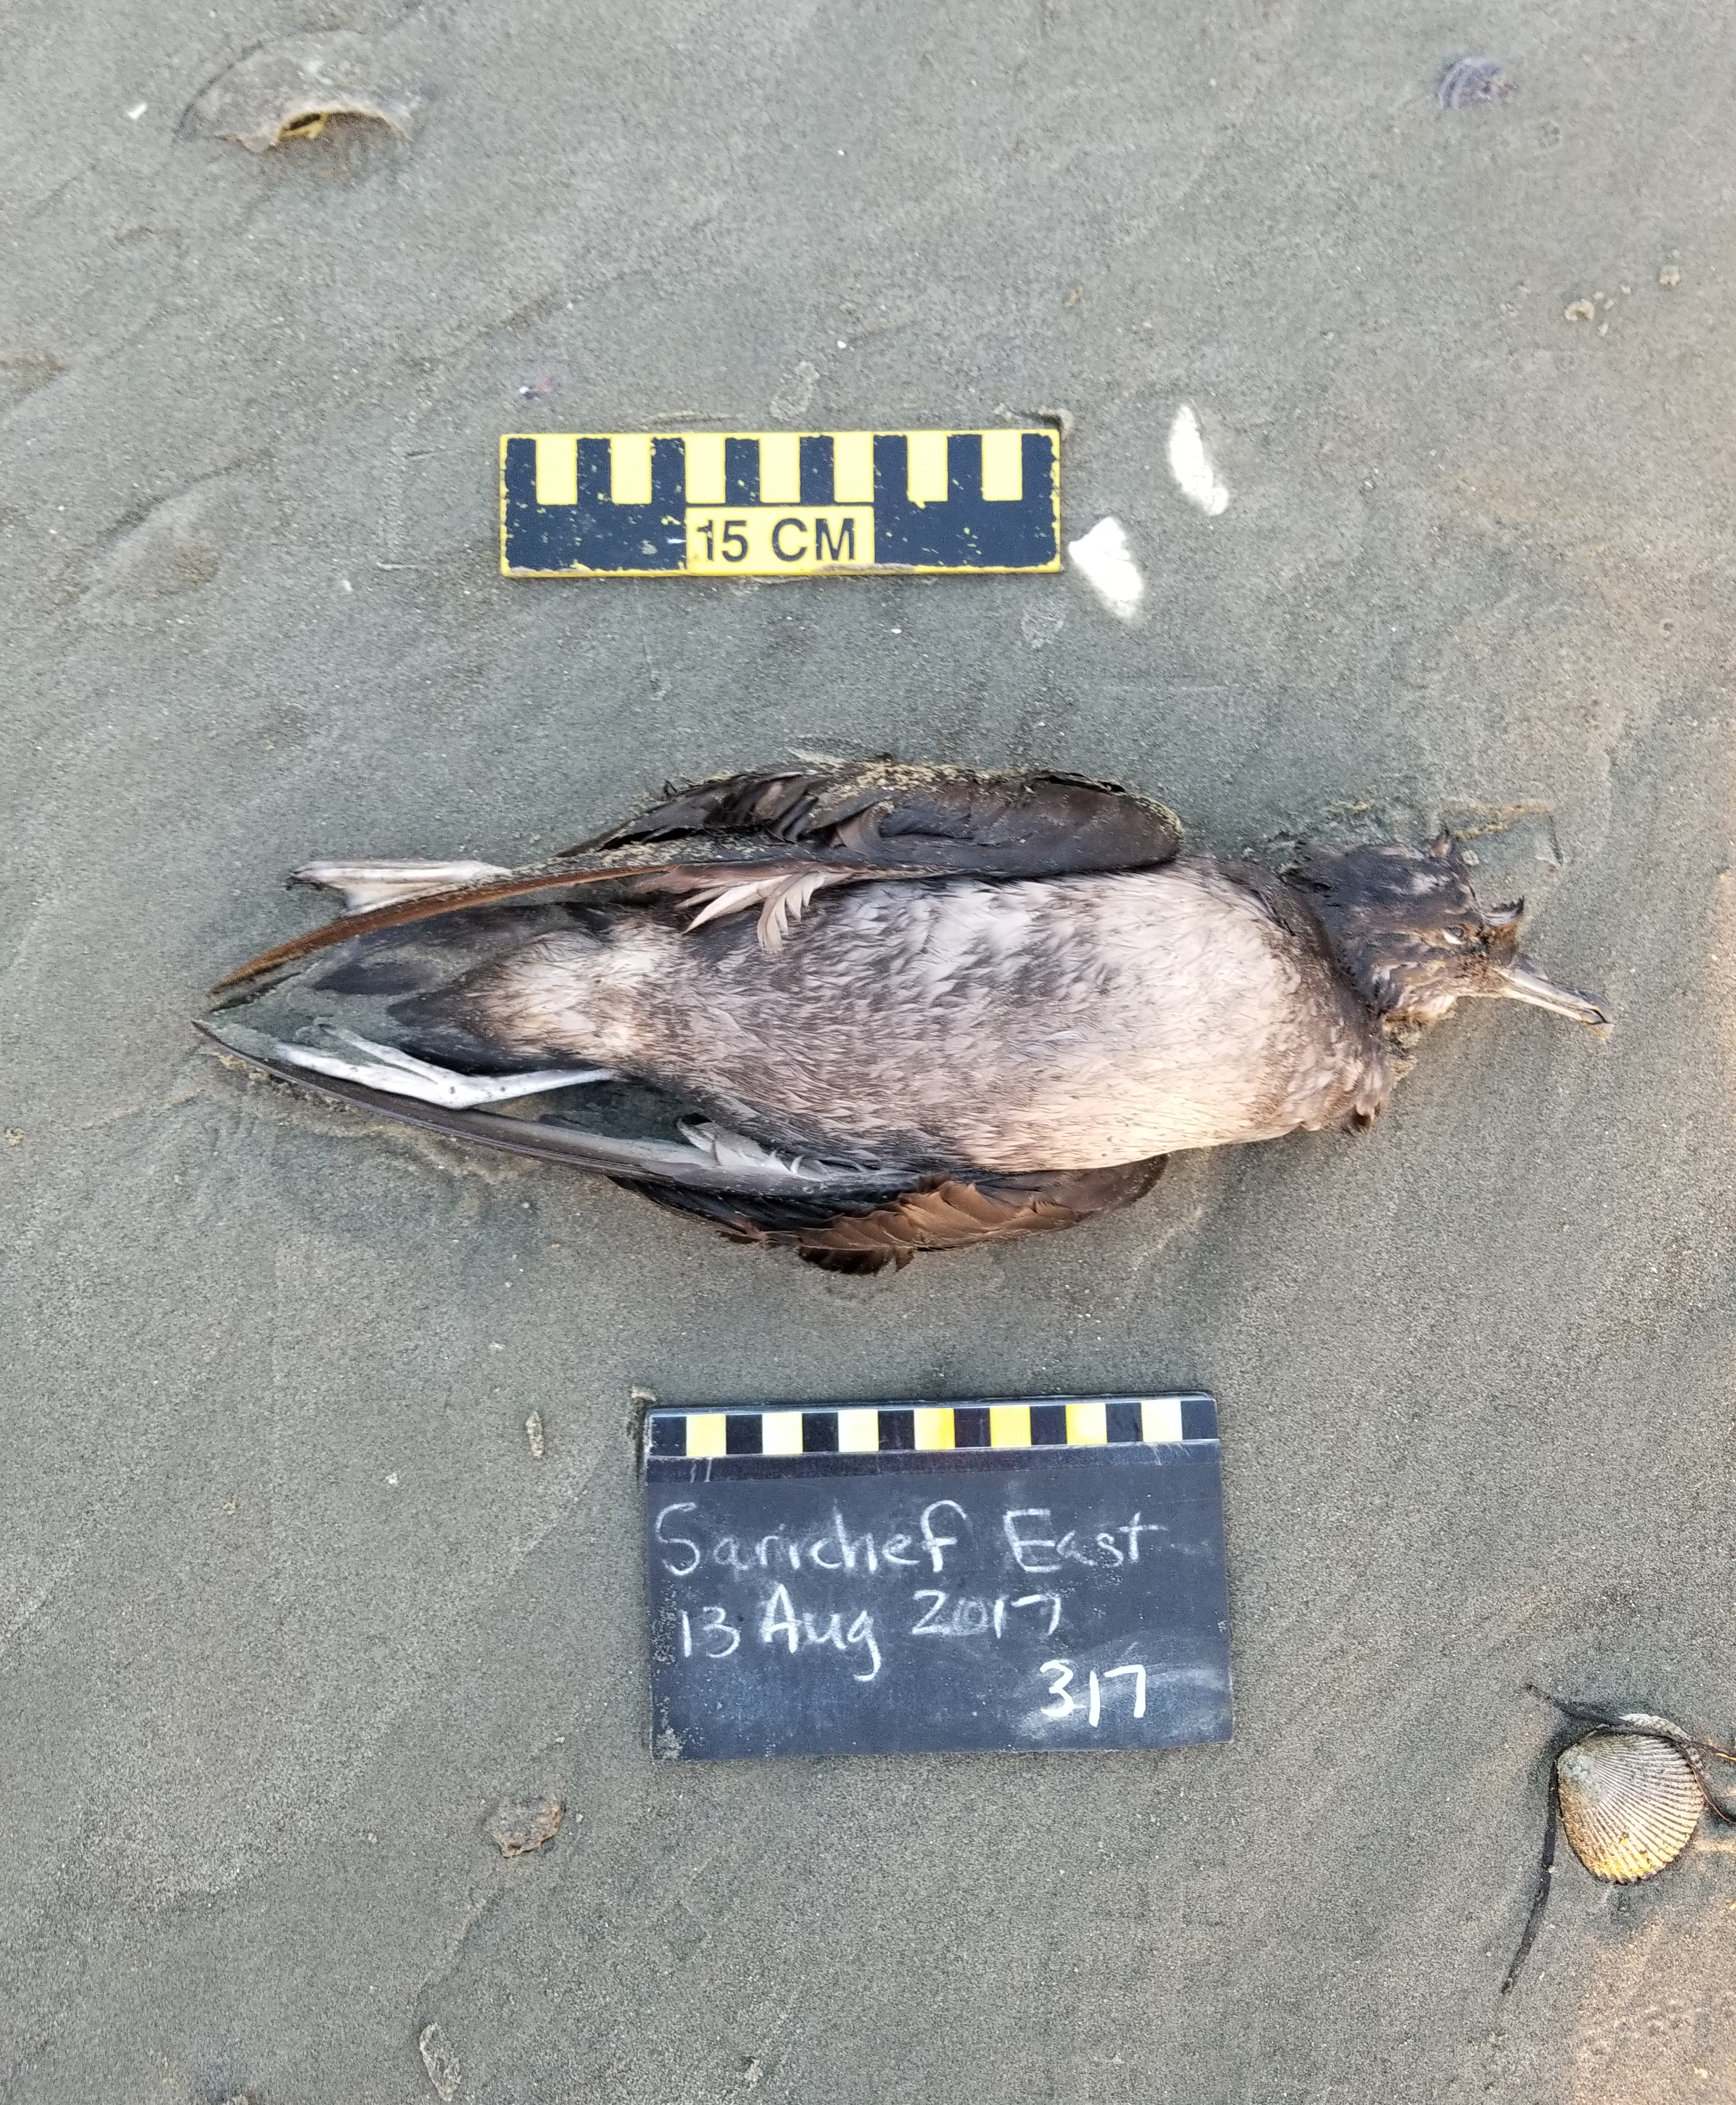 A short-tailed shearwater was found  near Shishmaref Aug. 13, 2017. Hundreds of dead birds have been found on the western and north western coasts of Alaska in the late summer 2017.  (Ken Stenek / Coastal Observation and Seabird Survey Team)